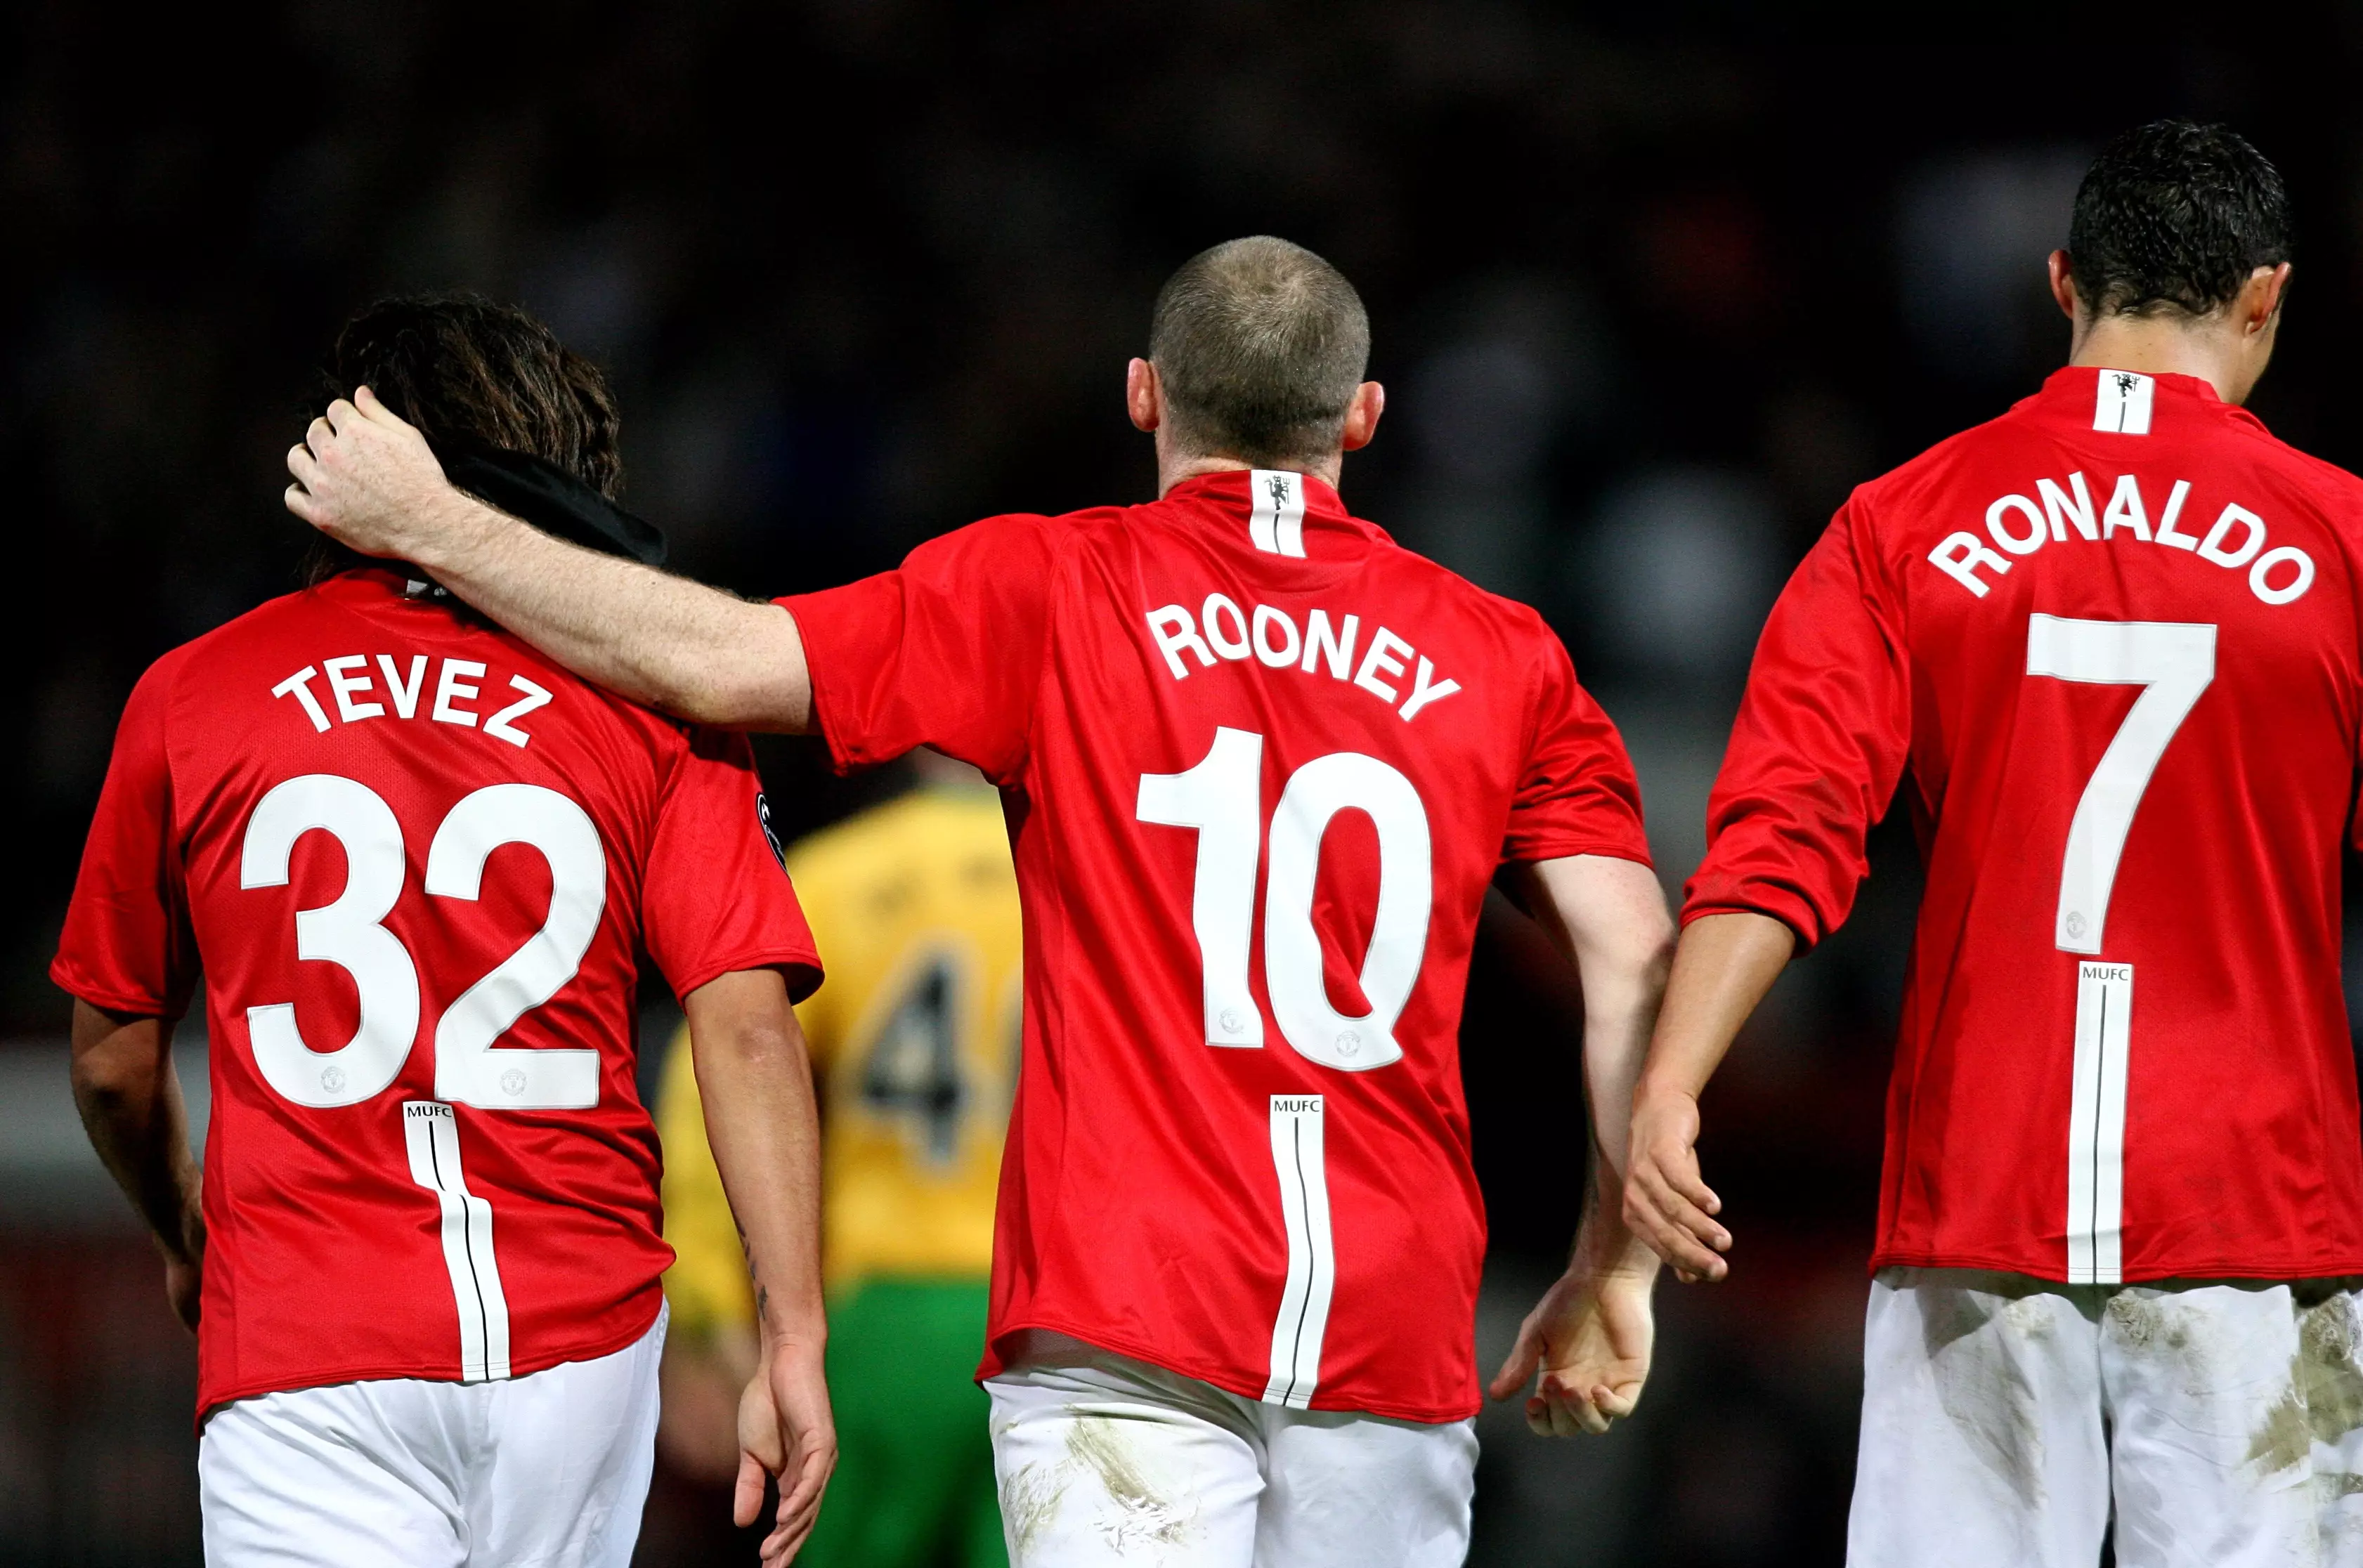 Tevez, Rooney and Ronaldo were quite the force together. Image: PA Images